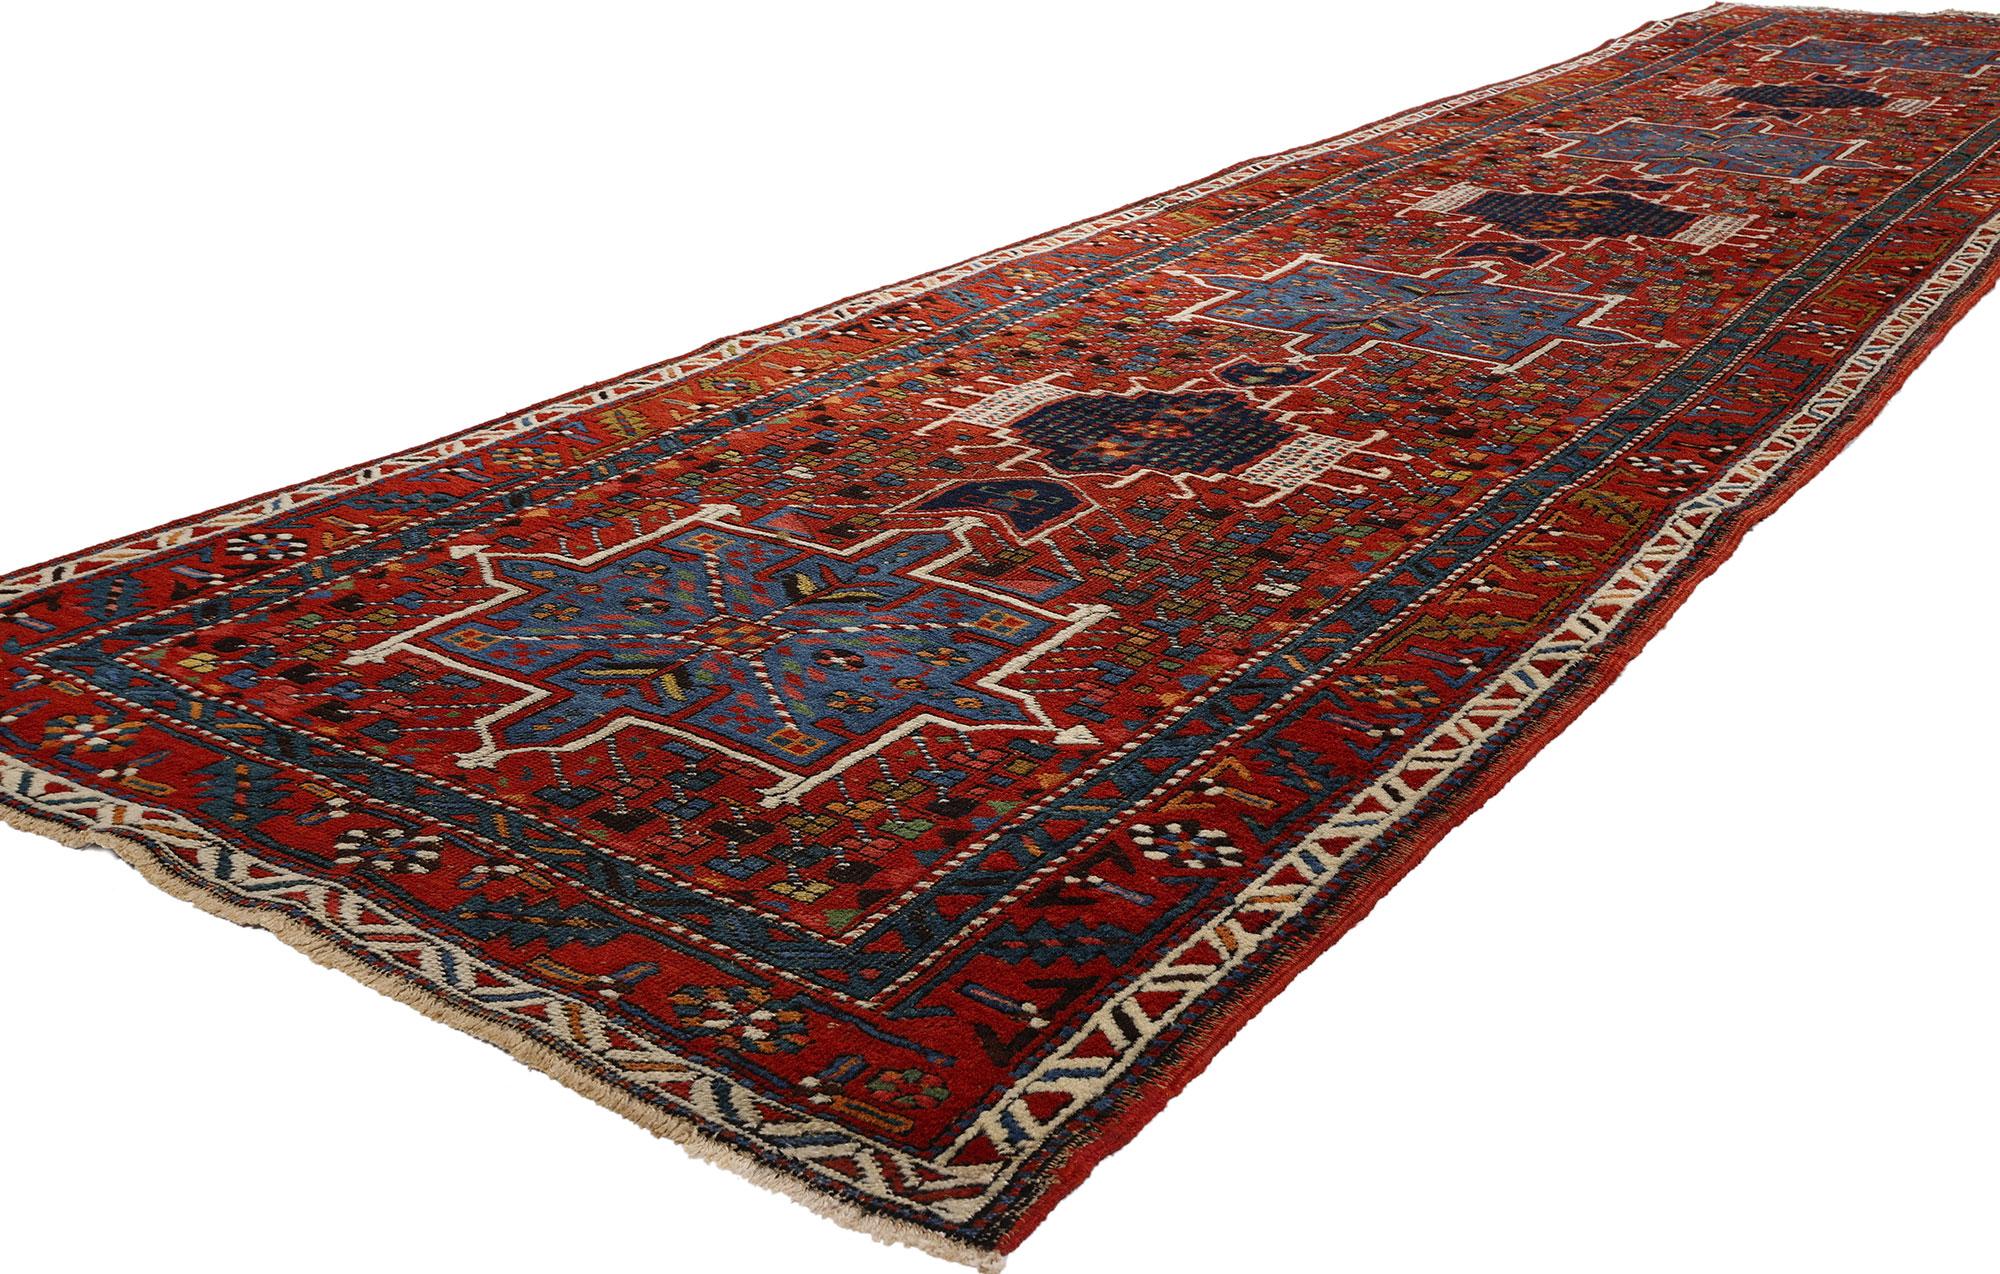 53873 Vintage Persian Karaja Heriz Rug Runner, 03'02 x 14'04. Persian Karaja Heriz rugs are handcrafted masterpieces originating from the Heriz region in Northwestern Iran, specifically from the village of Karaja. These rugs are distinguished by